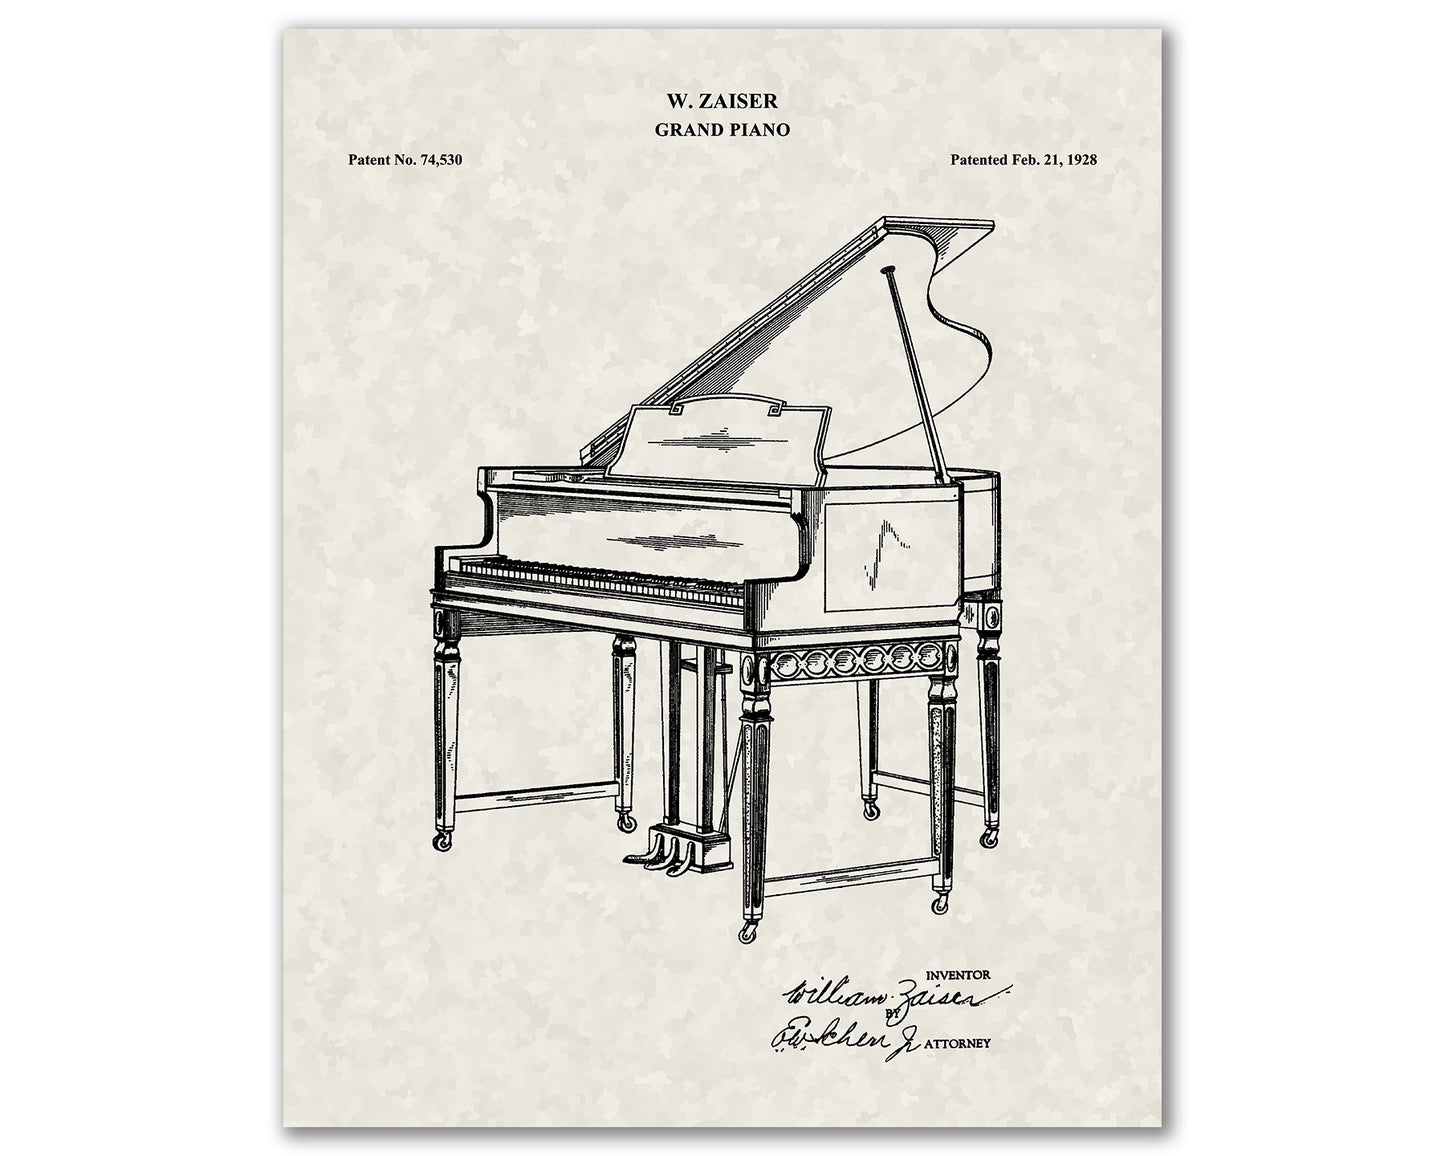 Grand Piano Patent Drawings, Music Studio Wall Art Poster, Great Vintage Room Decor, Art Prints, Musician Decor Gifts 03102